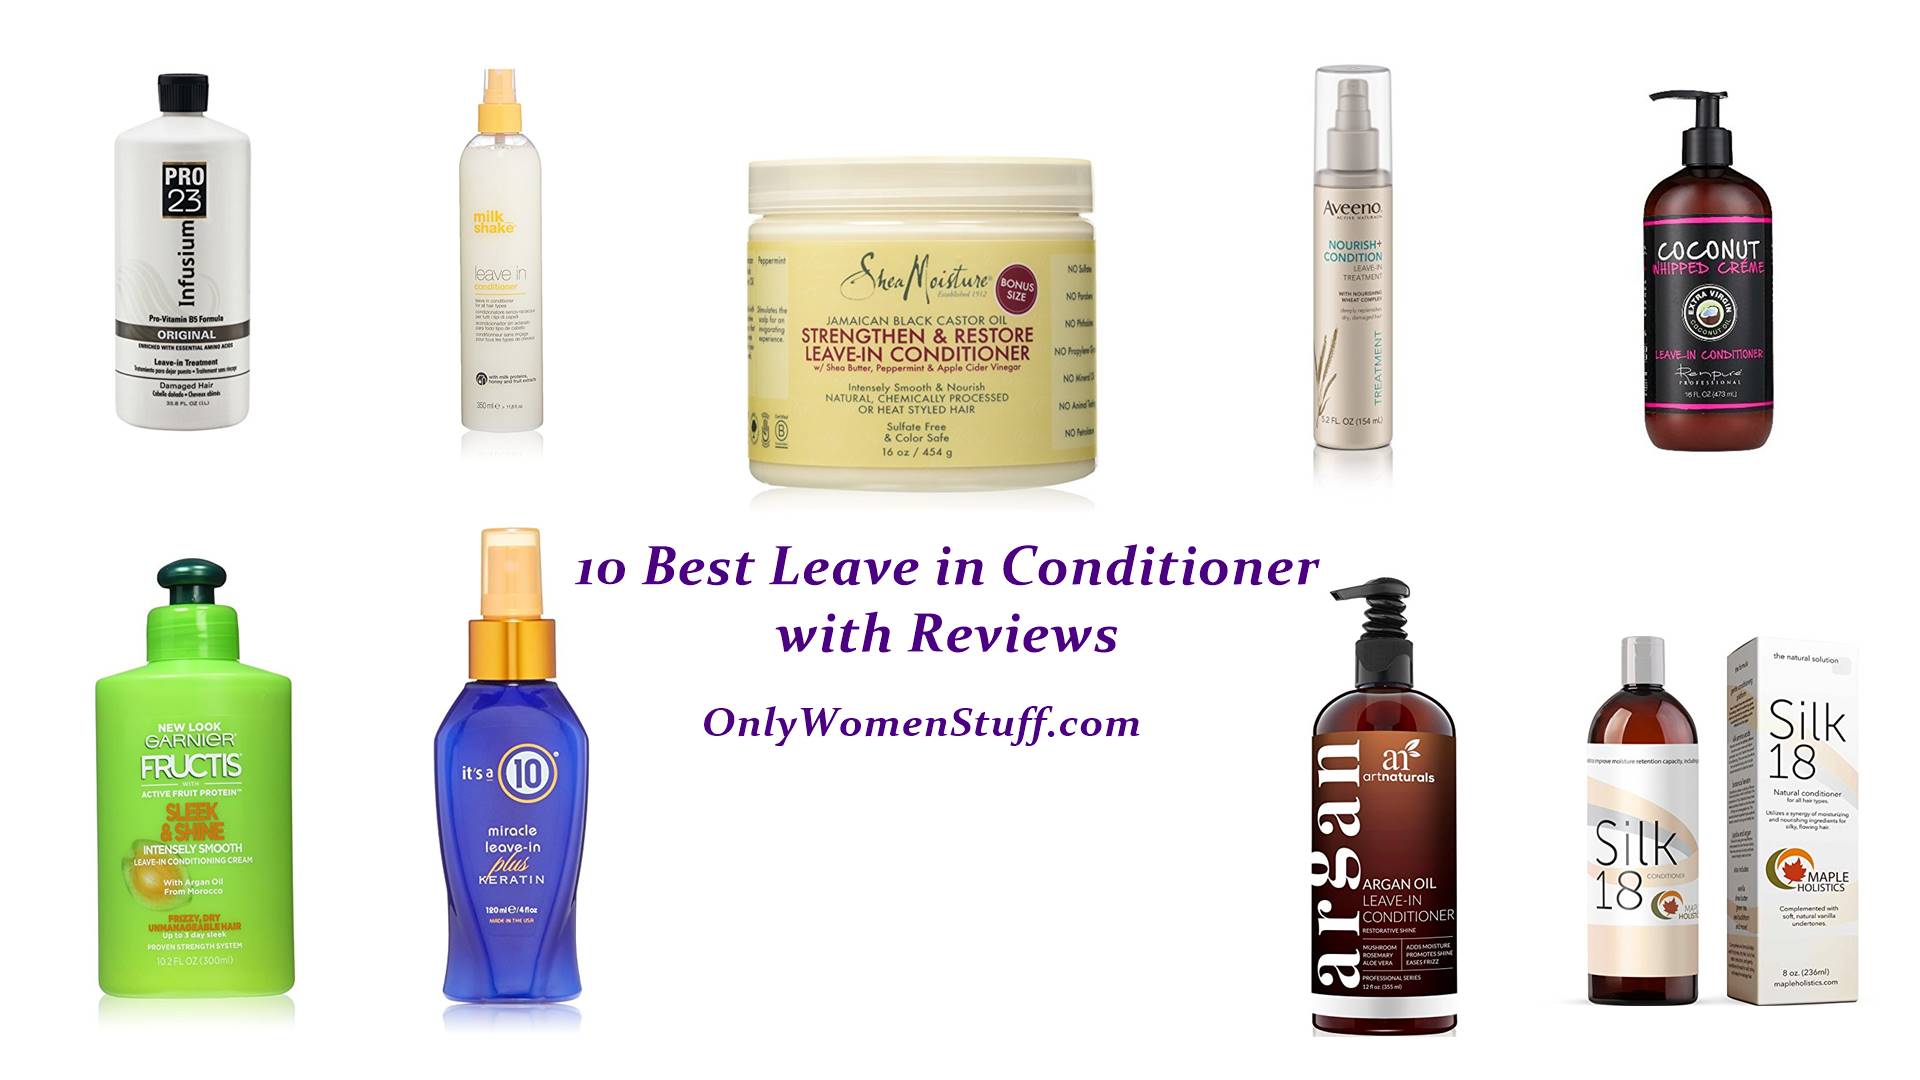 Best Leave in Conditioner with reviews, best leave in conditioner for curly hair, natural leave in conditioner cream